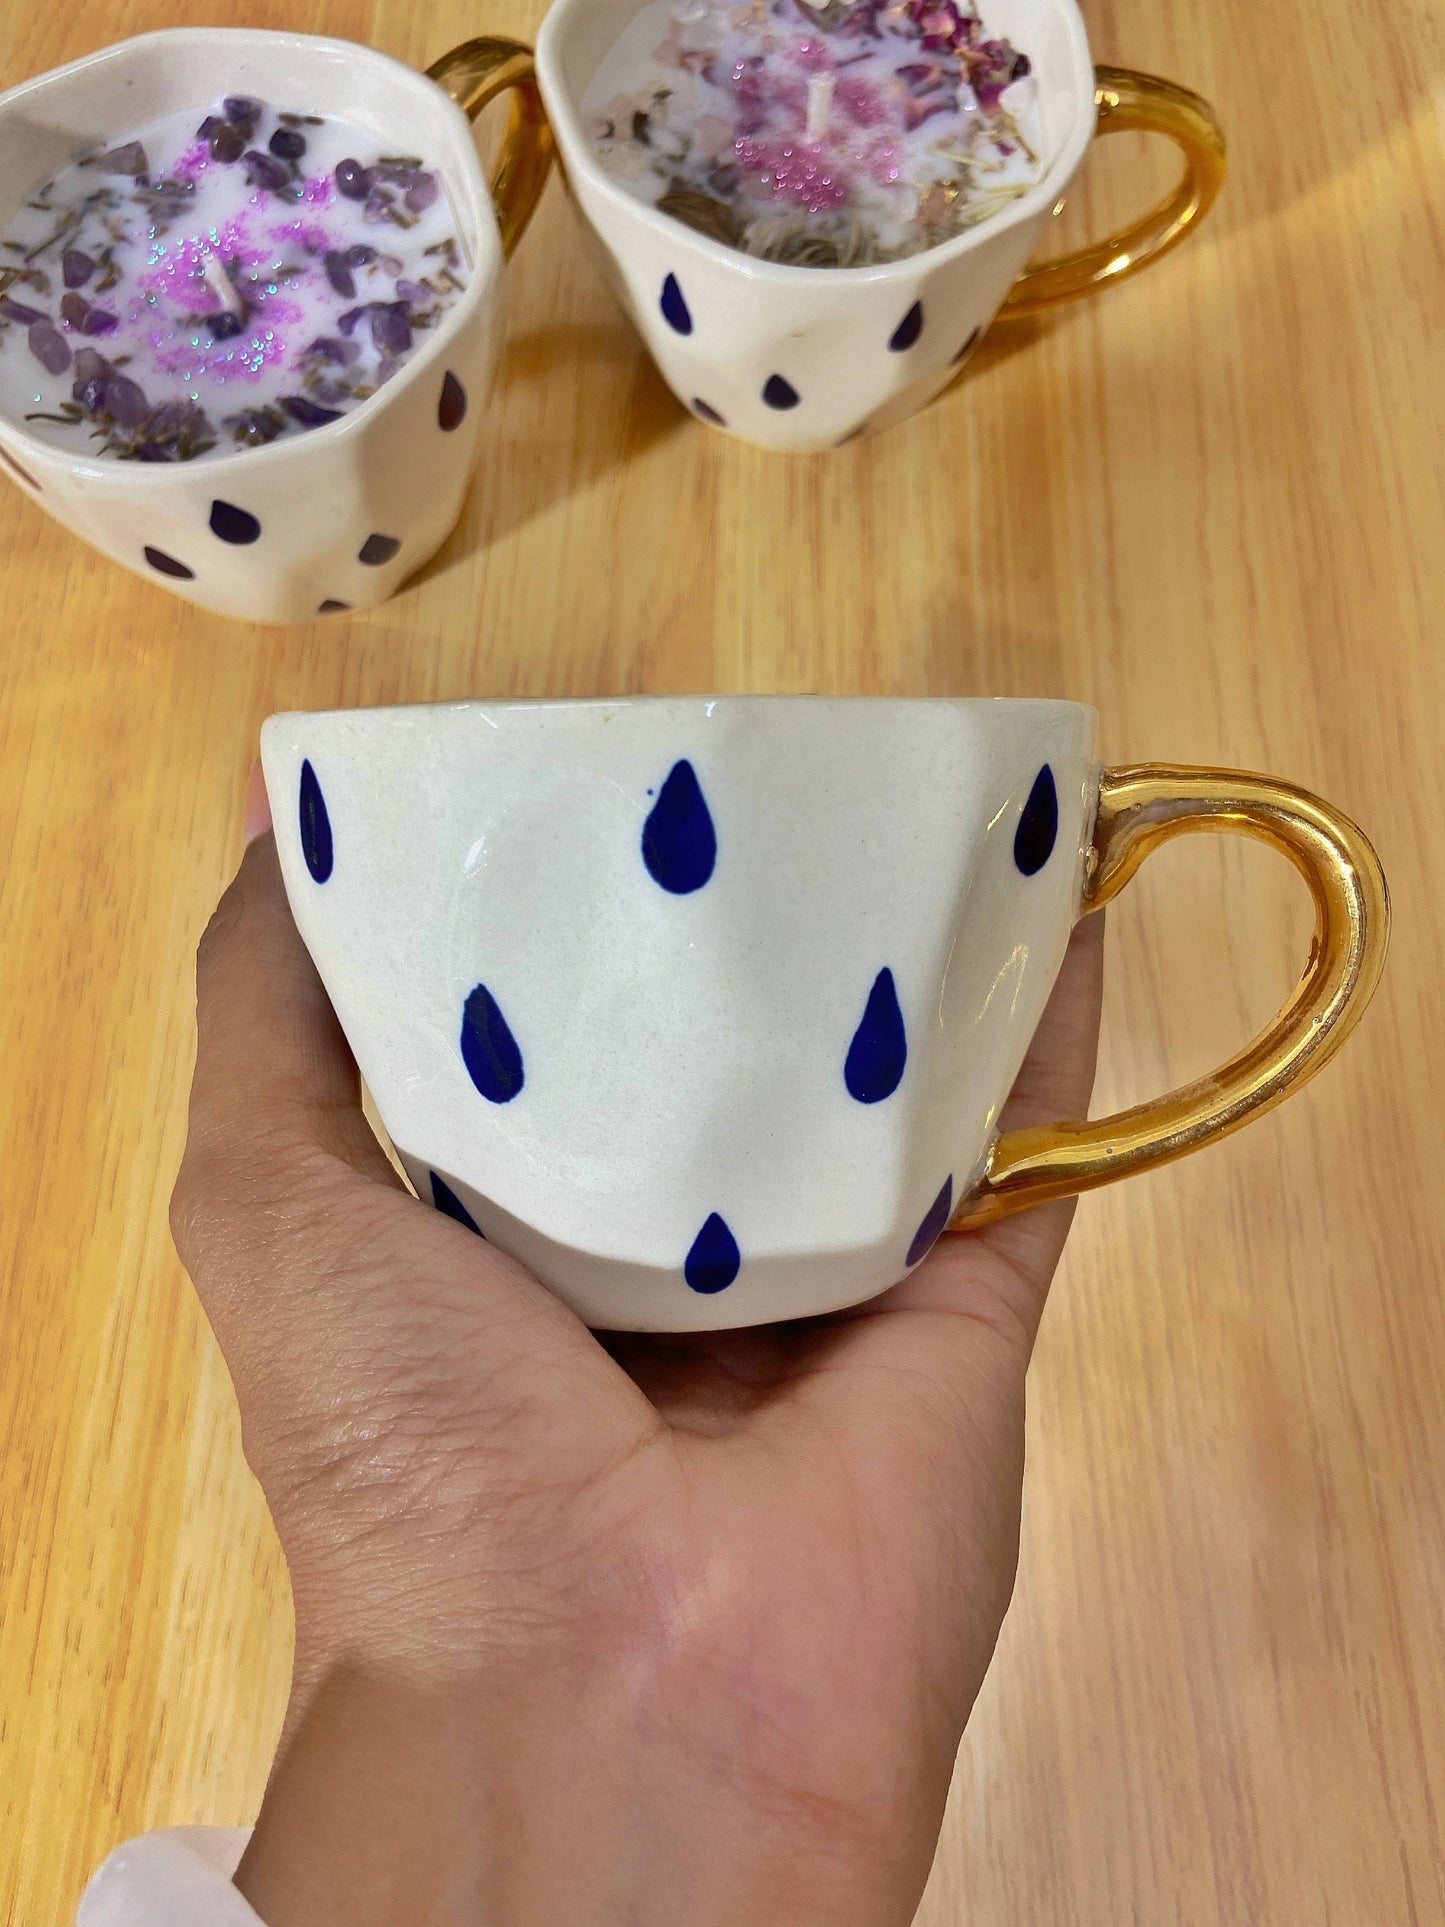 Lavender Buds + Amethyst Chips | Handmade Teardrop Print Mug With Real Liquid Gold In Handle Candles